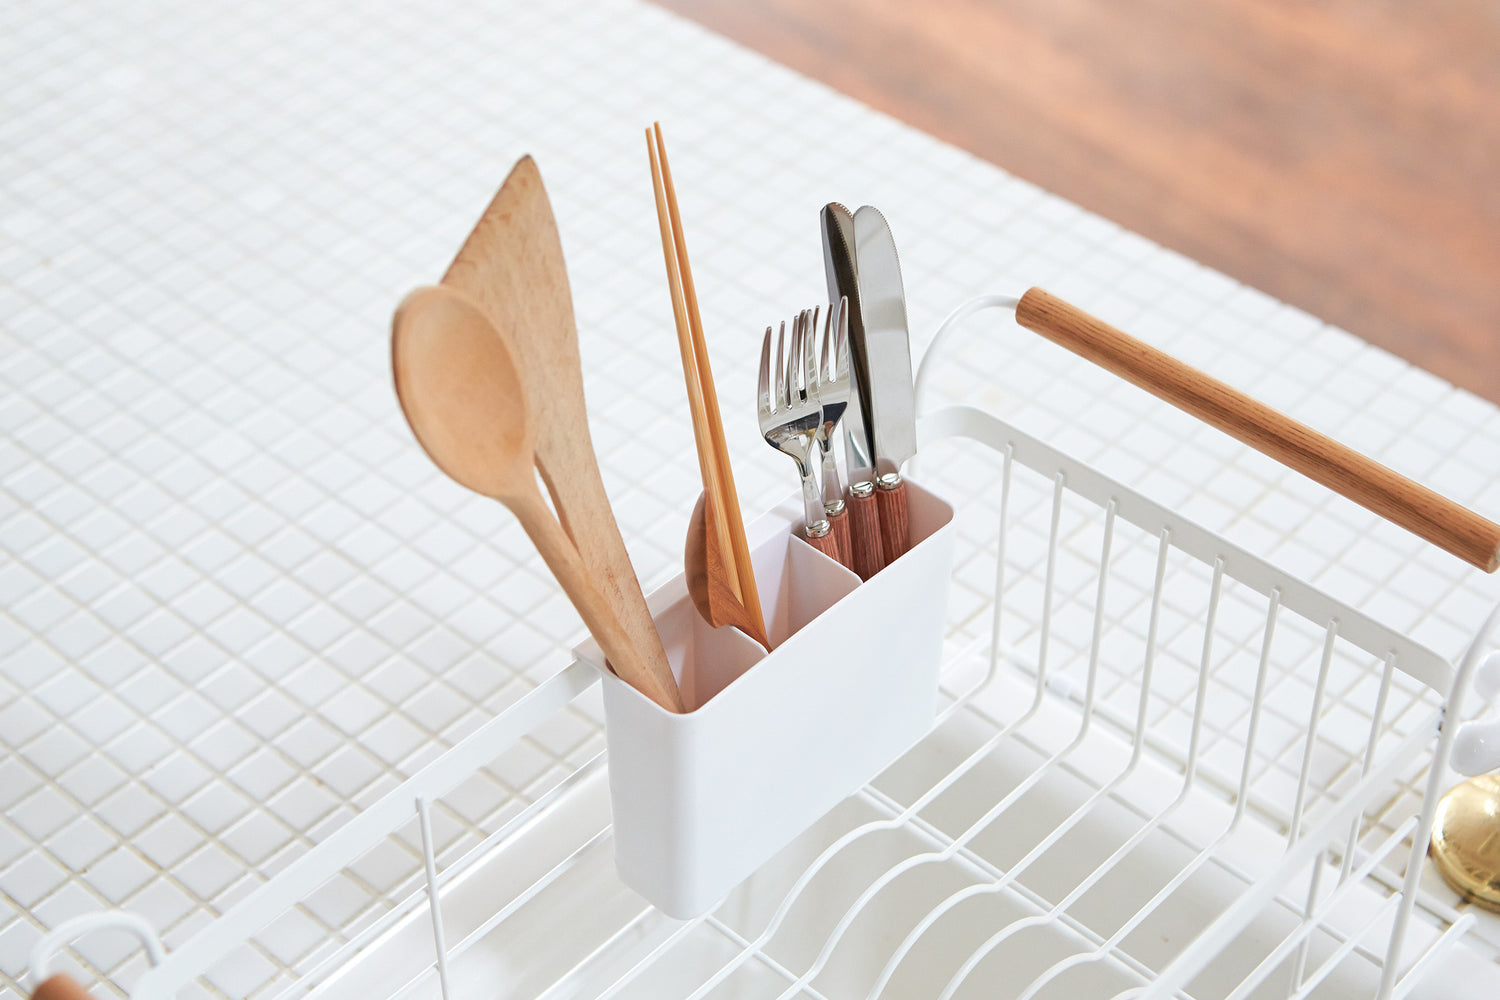 View 4 - White Over-the-Sink Expandable Dish Drying Rack holding silverware by Yamazaki Home.